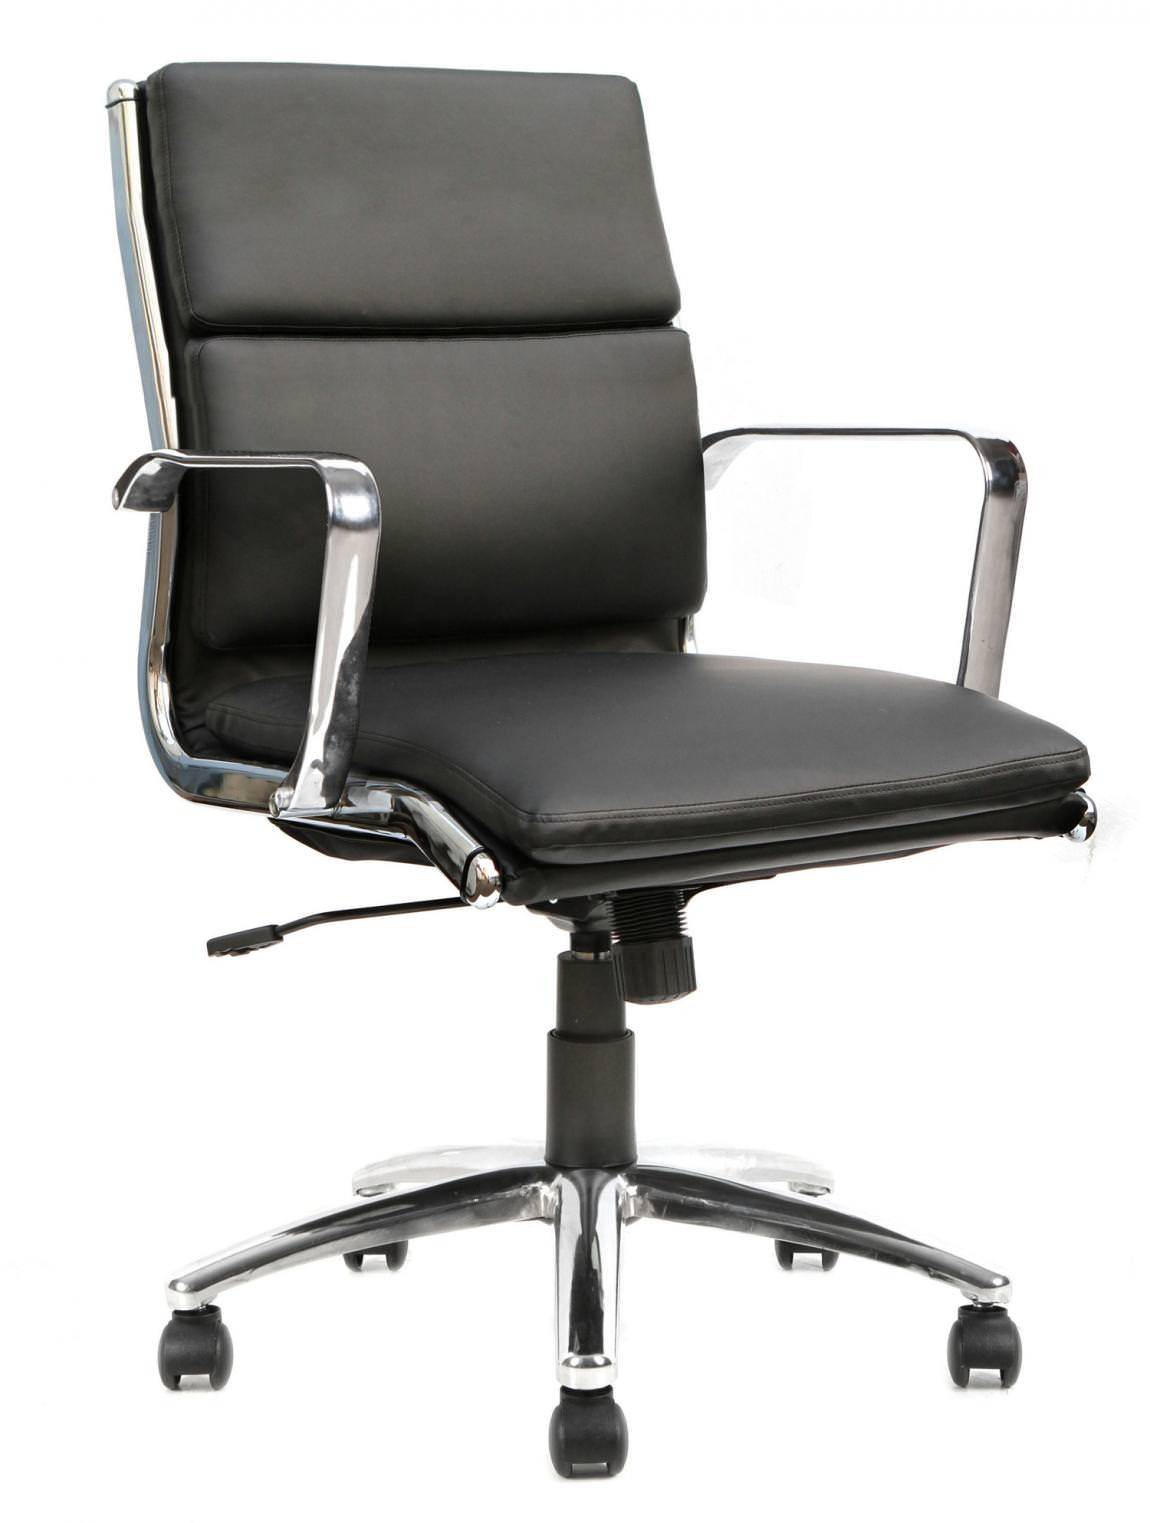 Black Mid Back Office and Conference Room Chair with Arms